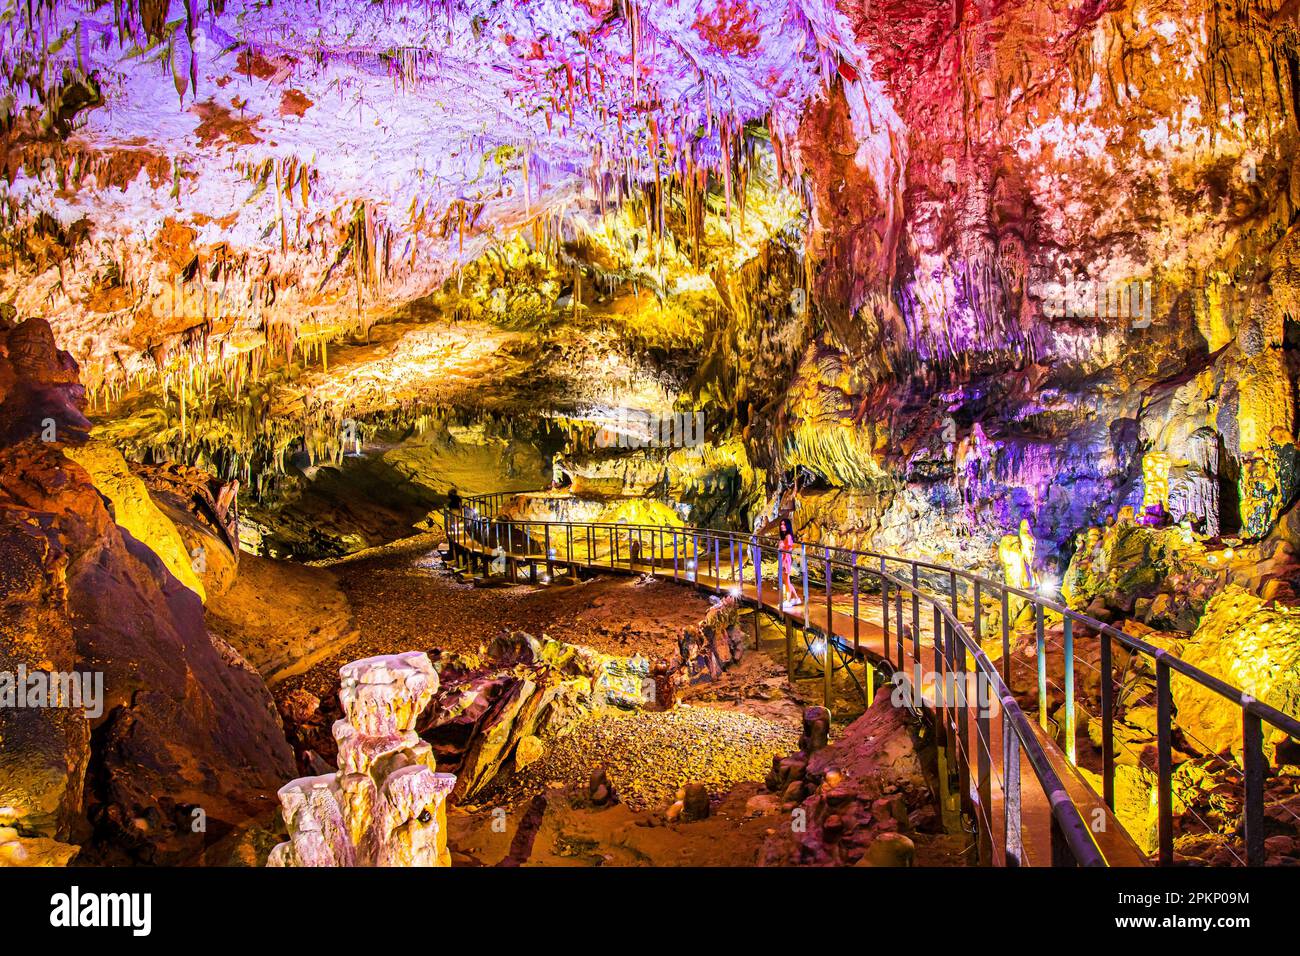 Pathway in Prometheus cave with beautiful colorful structures and formations Stock Photo